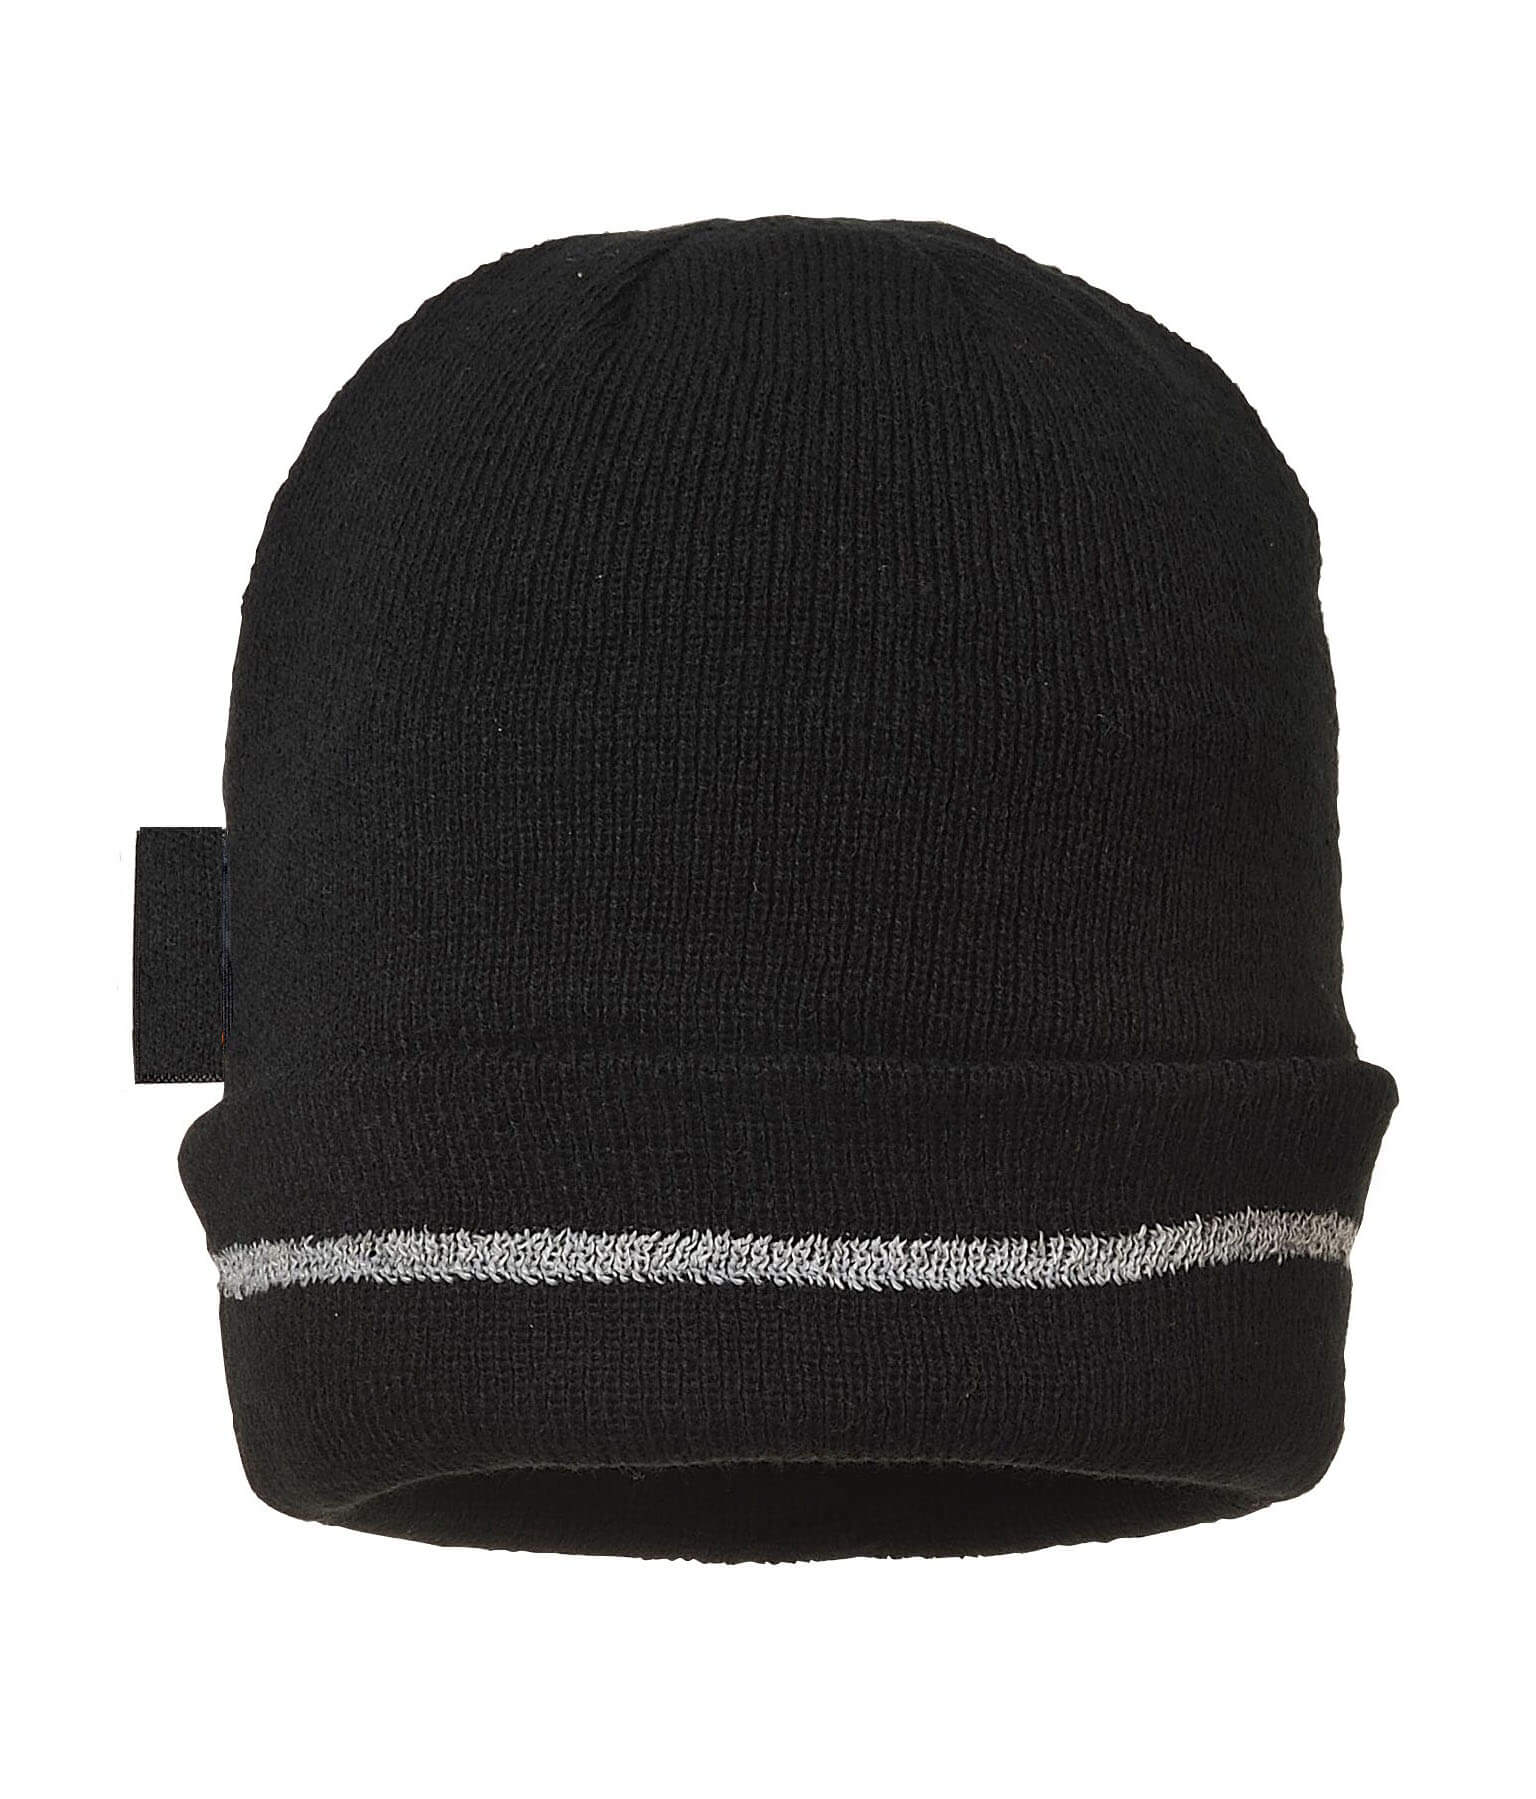 Reflective Insulated Trim Knit Hat